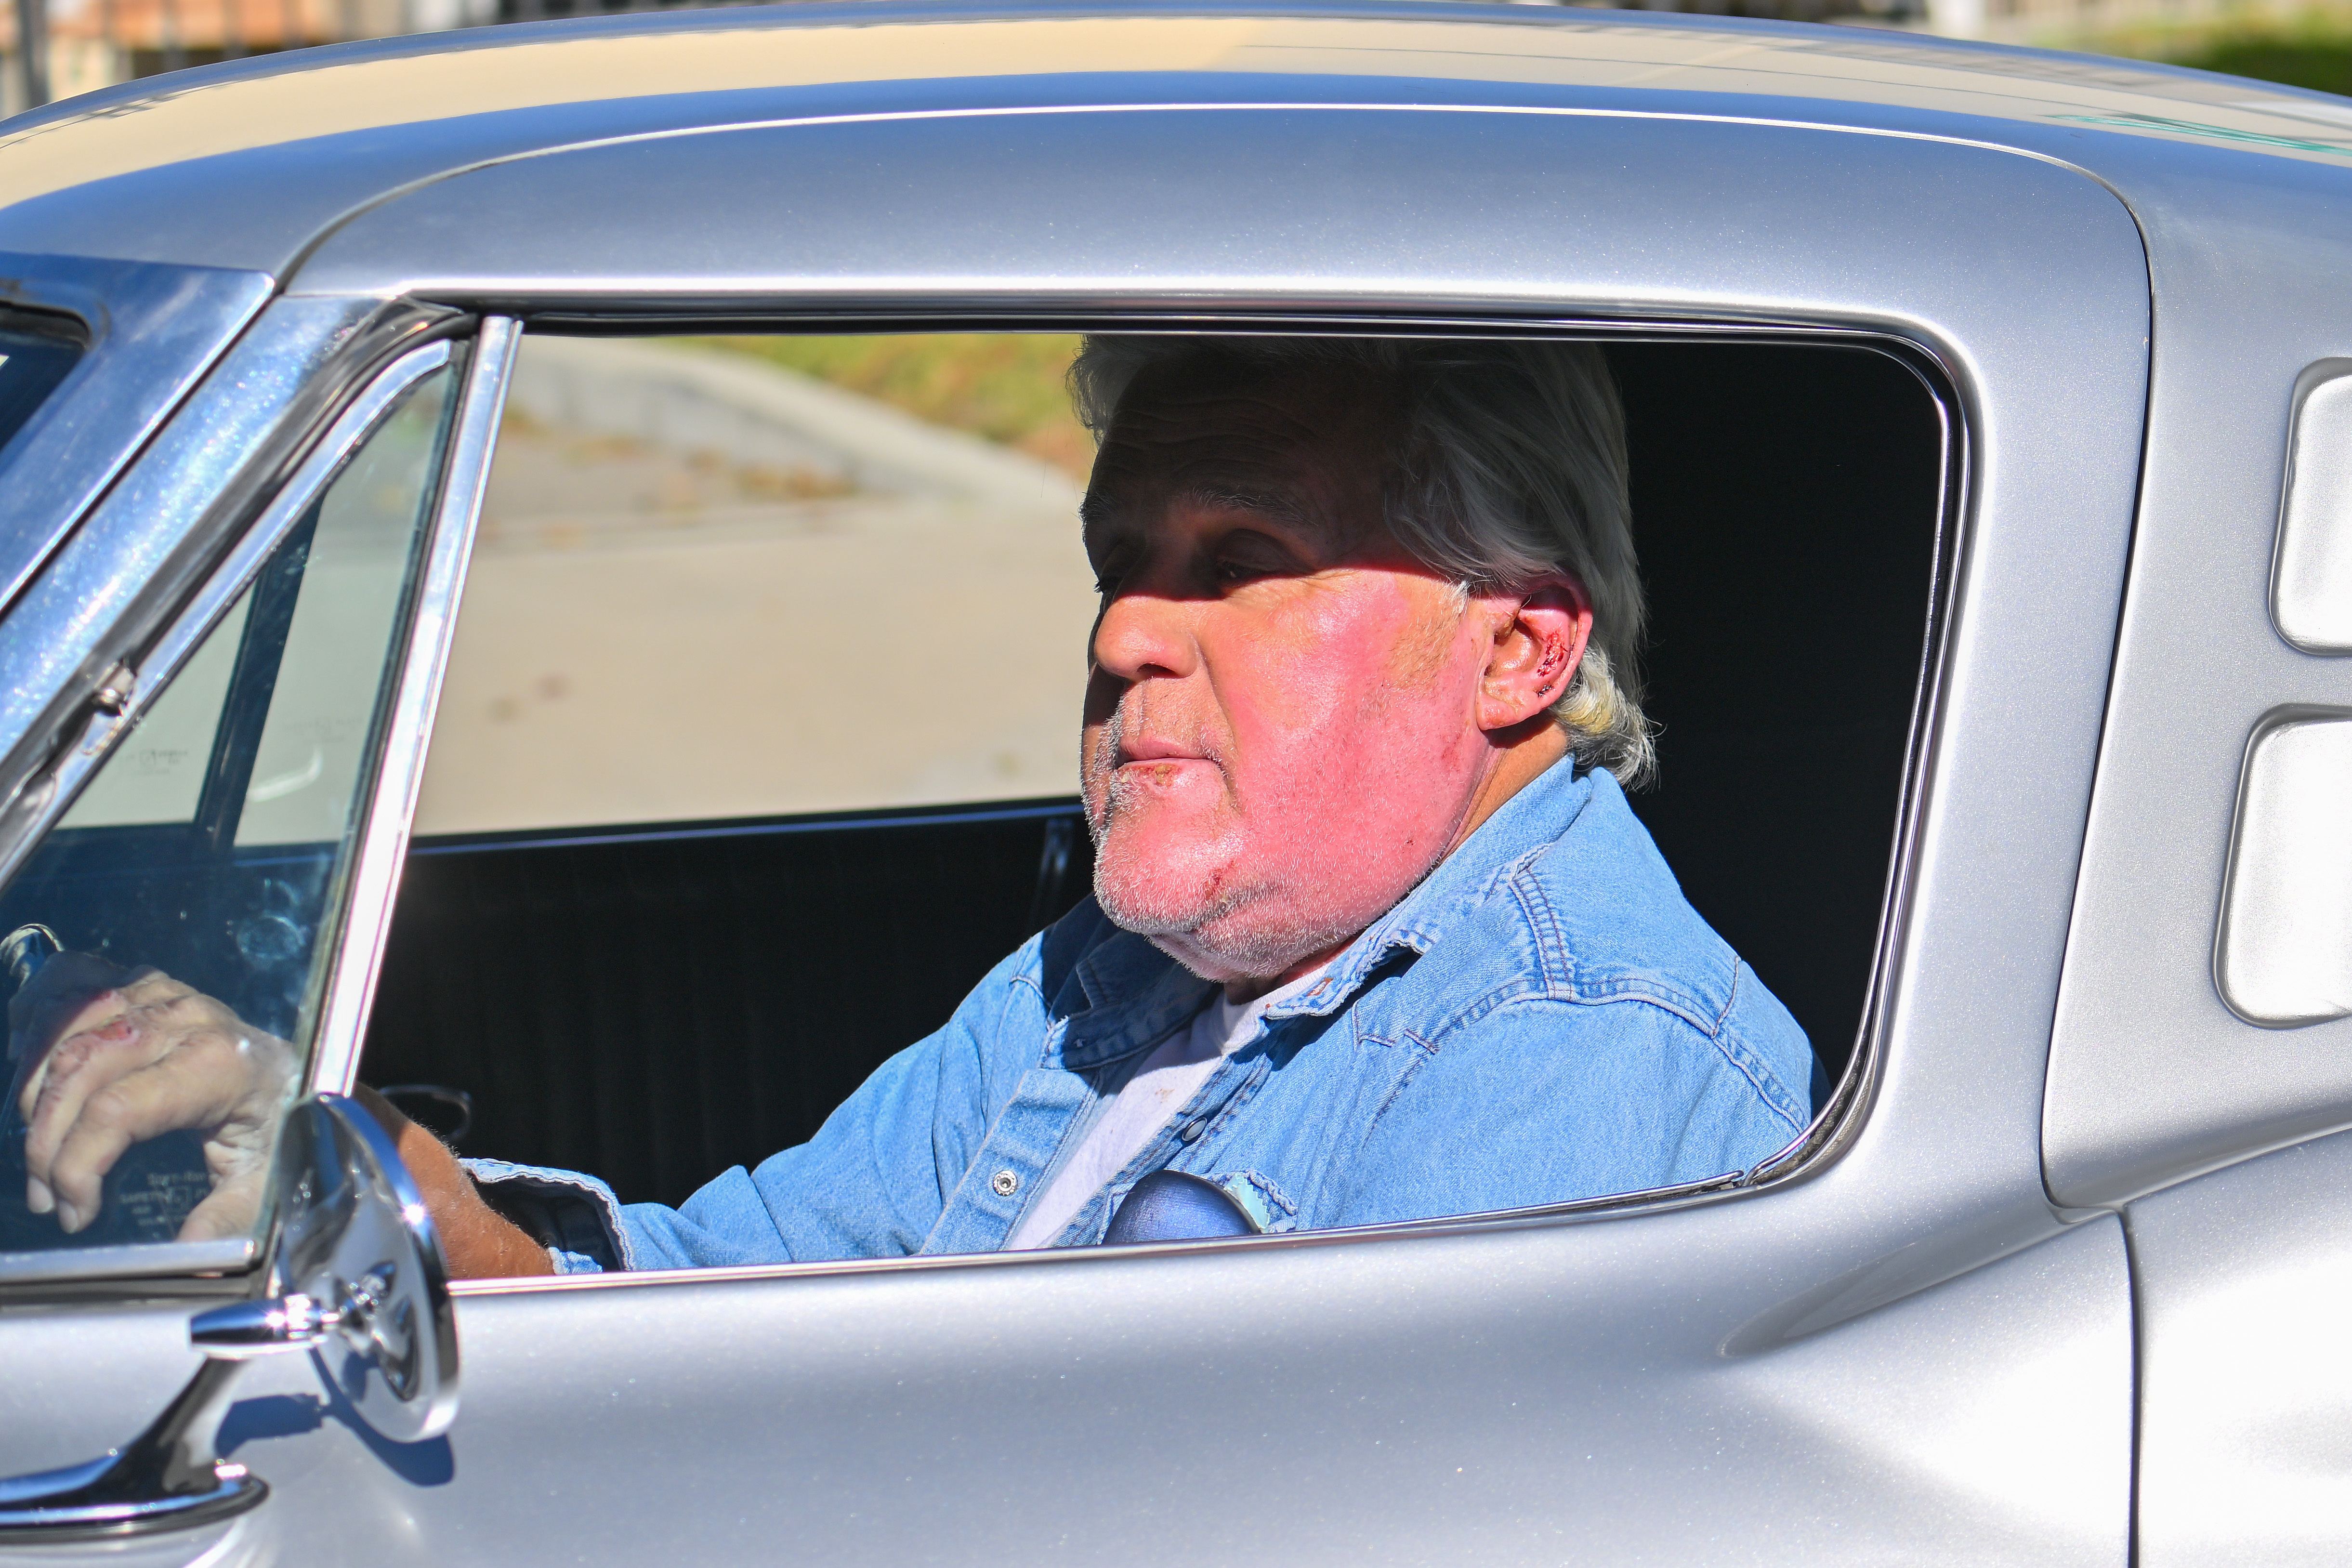 Jay Leno drives his car on November 22, 2022, in Los Angeles, California. | Source: Getty Images